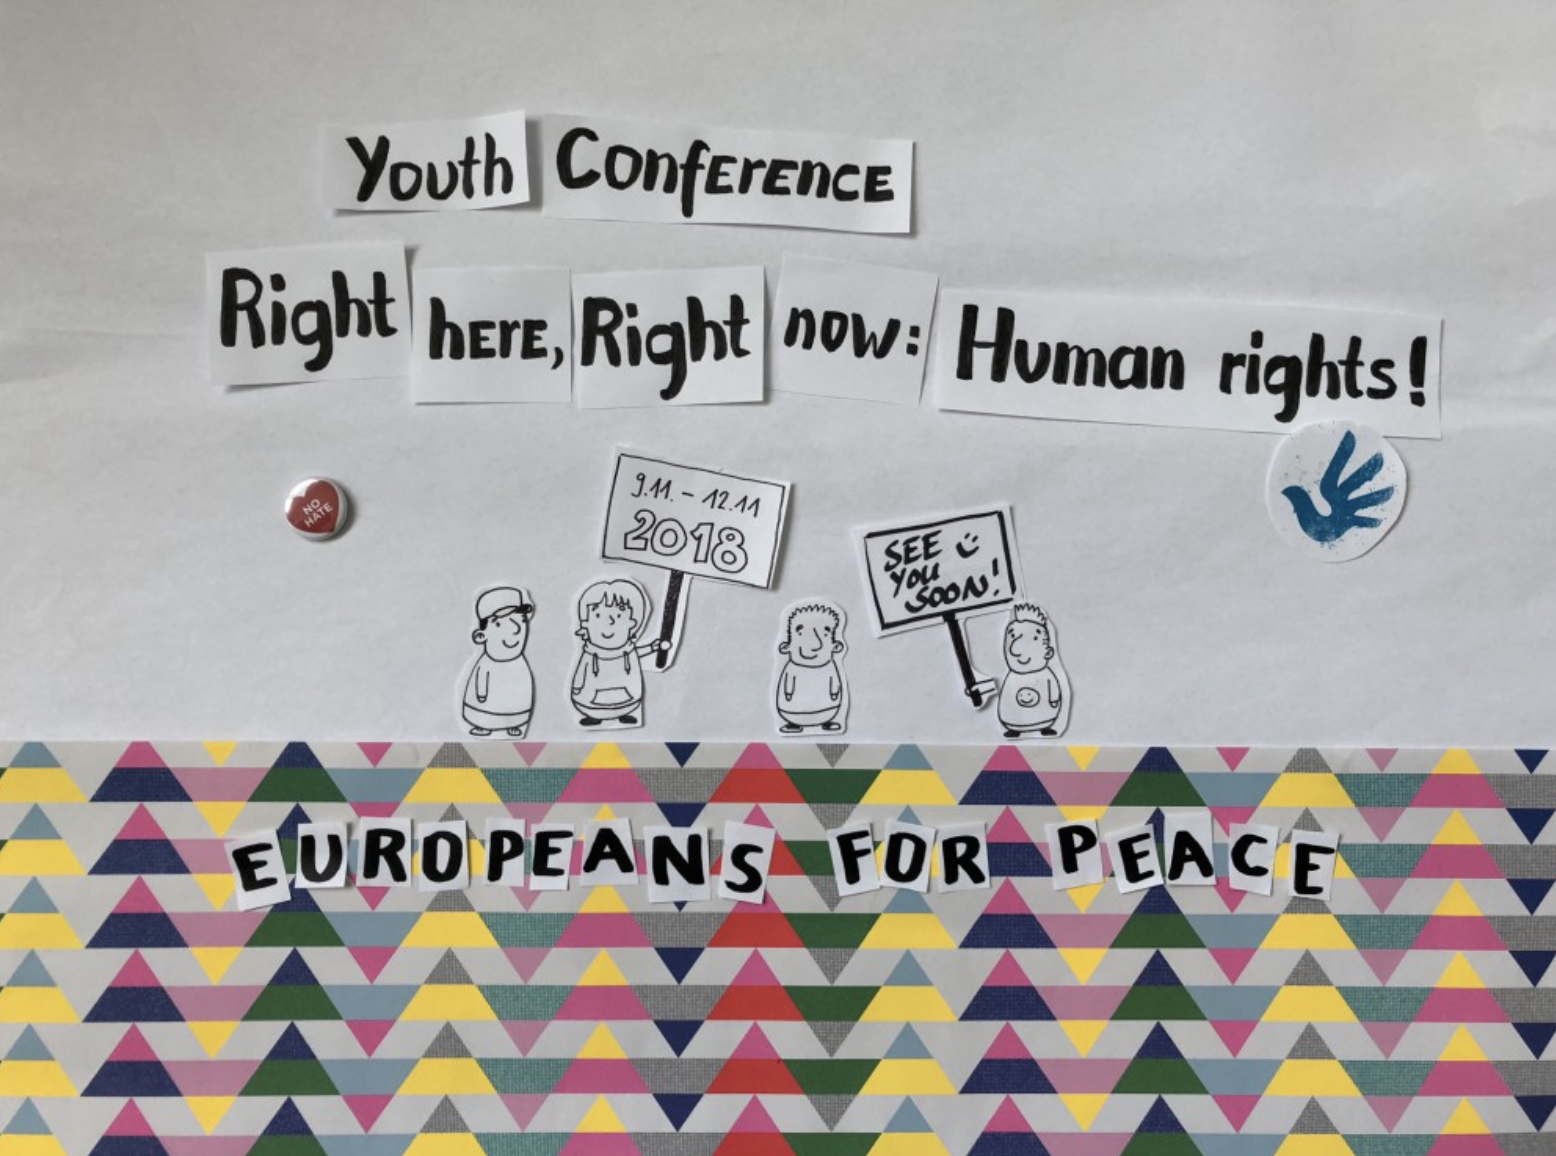 Right here, right now: Human Rights! – Internationale Jugendkonferenz